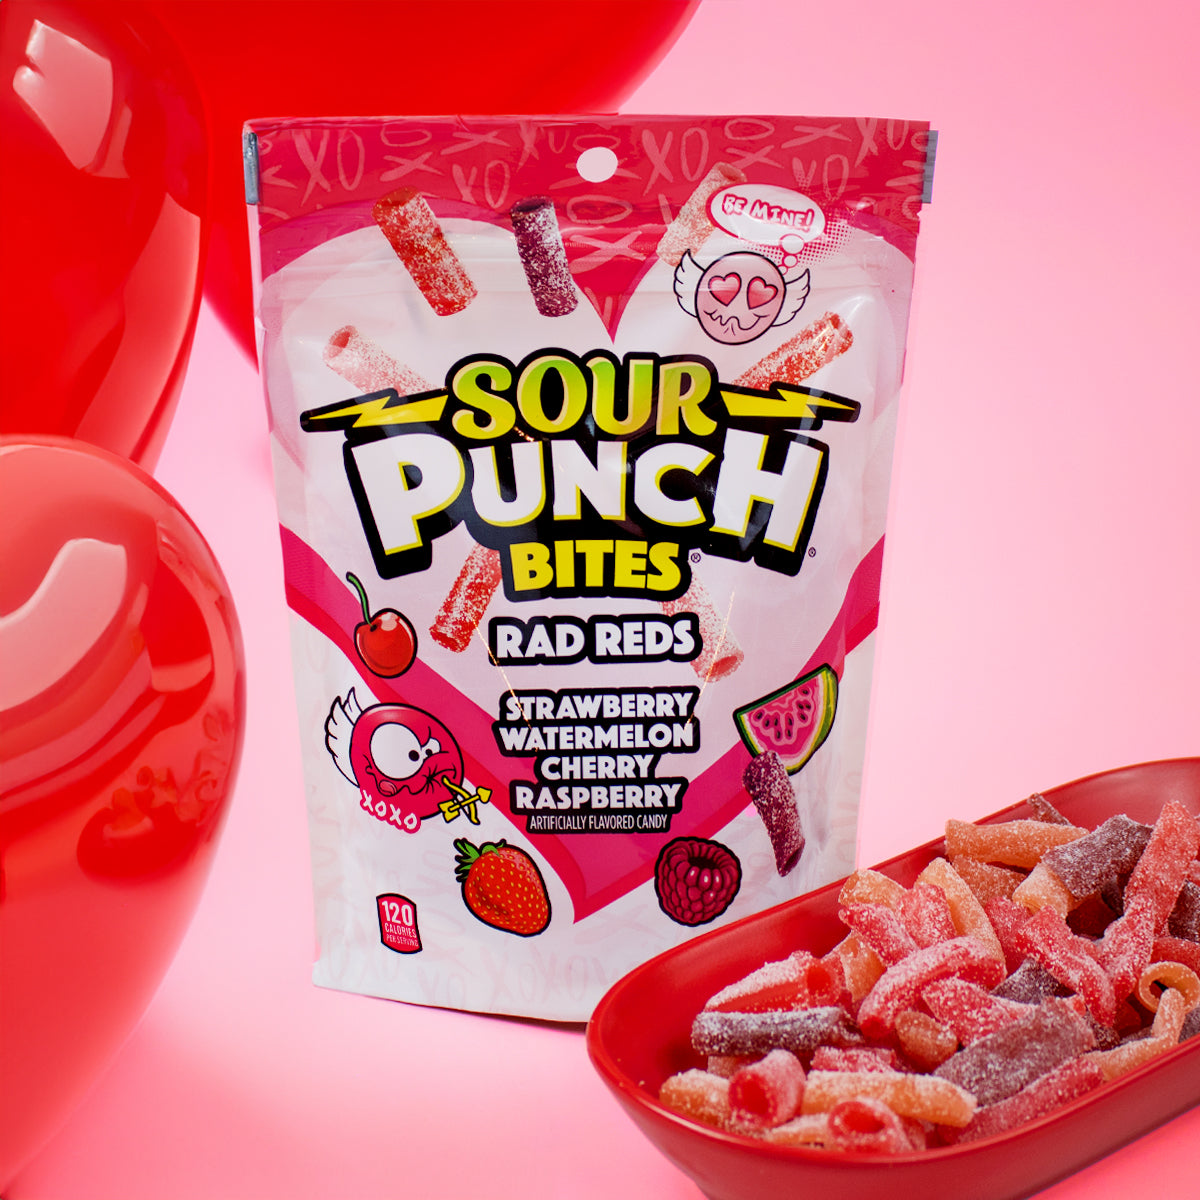 SOUR PUNCH Rad Reds Valentine's Day Candy Bites with red, heart-shaped balloons beside the bag